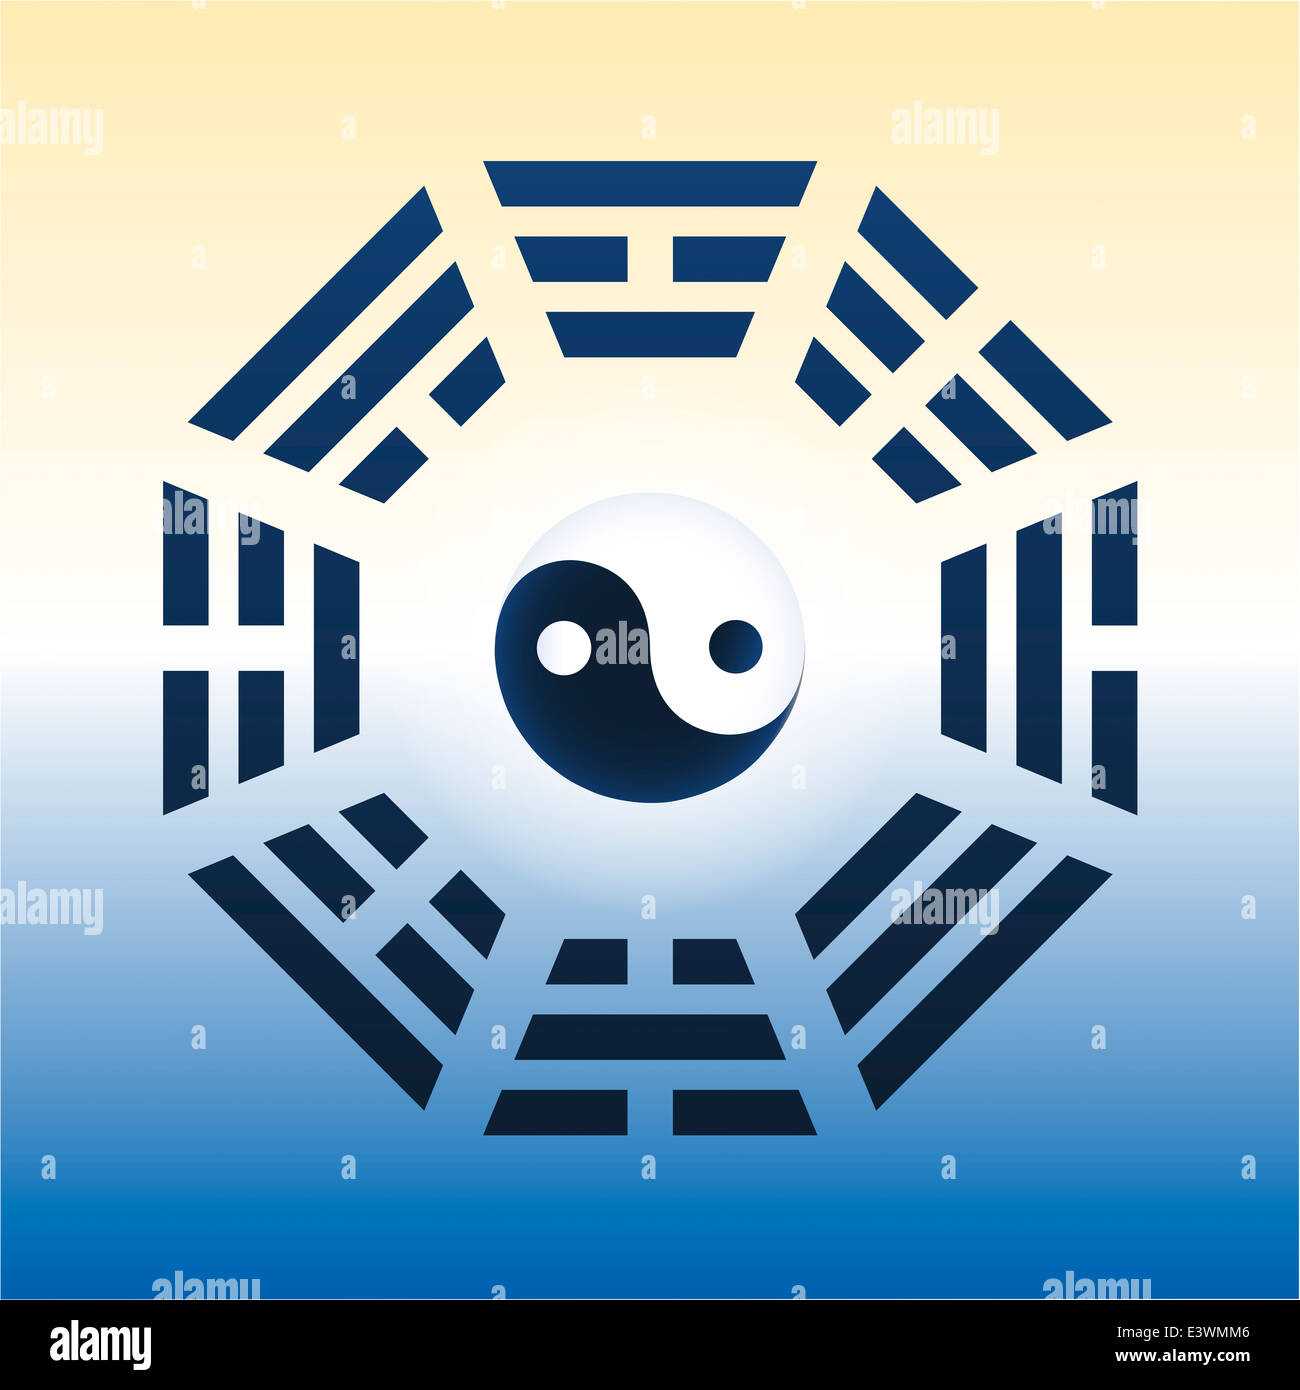 I Ching with eight trigrams and the yin and yang symbol in the center. Stock Photo